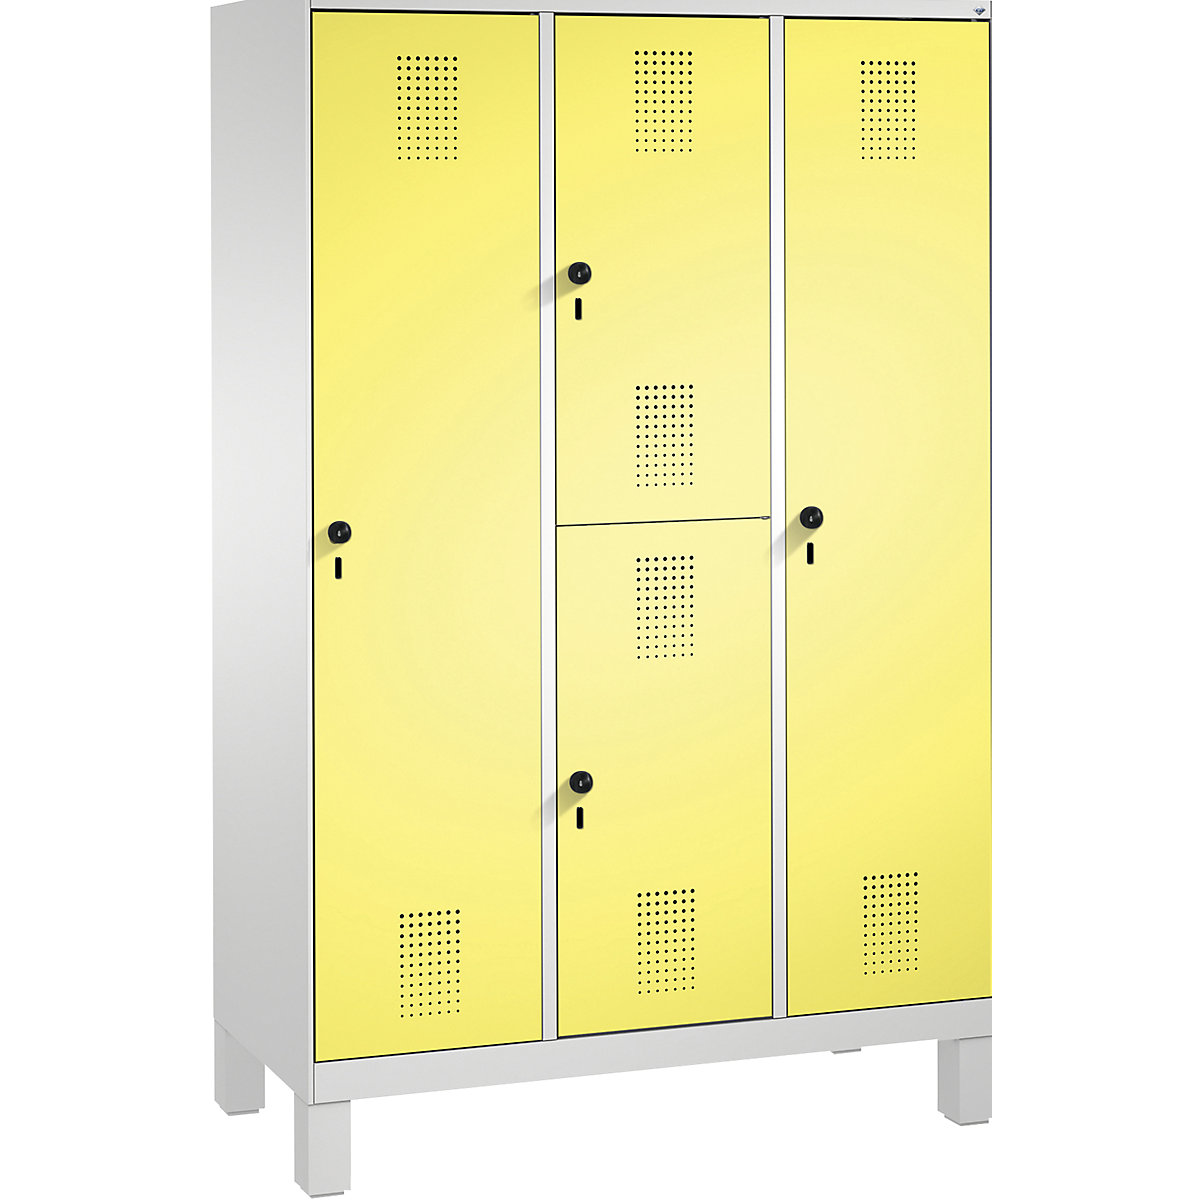 EVOLO combination cupboard, single and double tier – C+P, 3 compartments, 4 doors, compartment width 400 mm, with feet, light grey / sulphur yellow